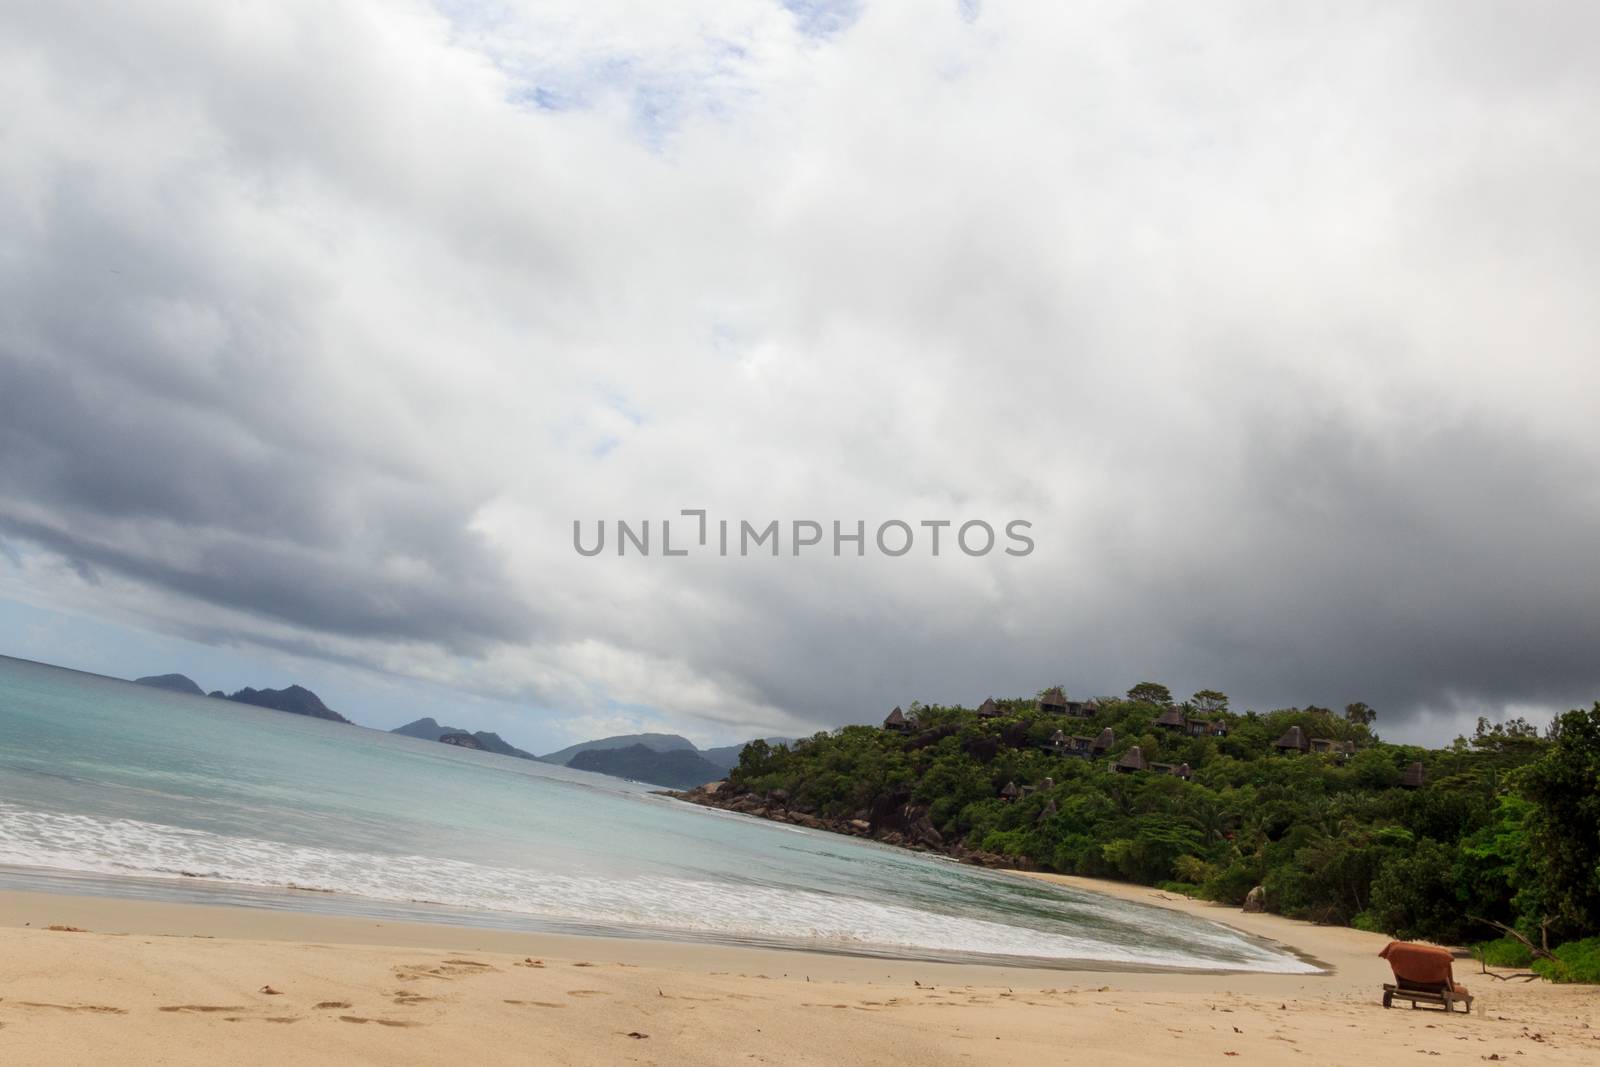 Beautiful view of Seychelles beach with a single chair in the sand on a cloudy warm day. Concept of tourist islands.